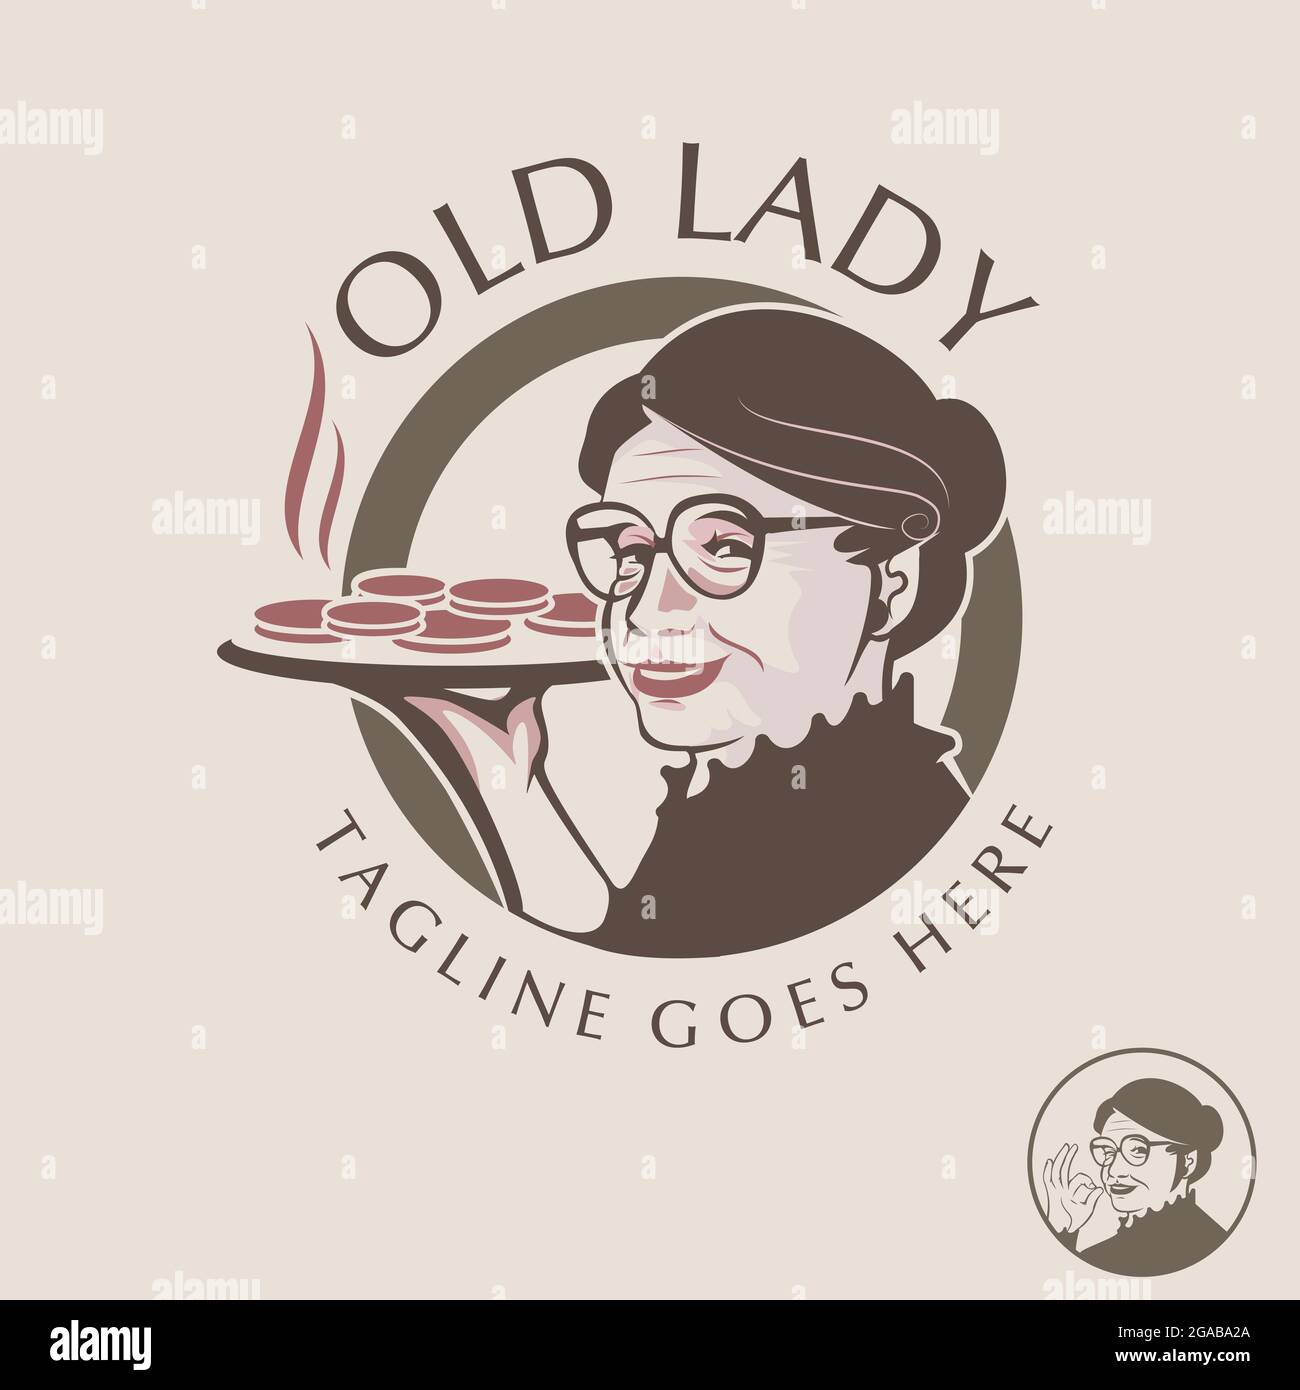 Old Lady with a plate of food clip art or template. the food is on separated layer for easy editing. Stock Vector